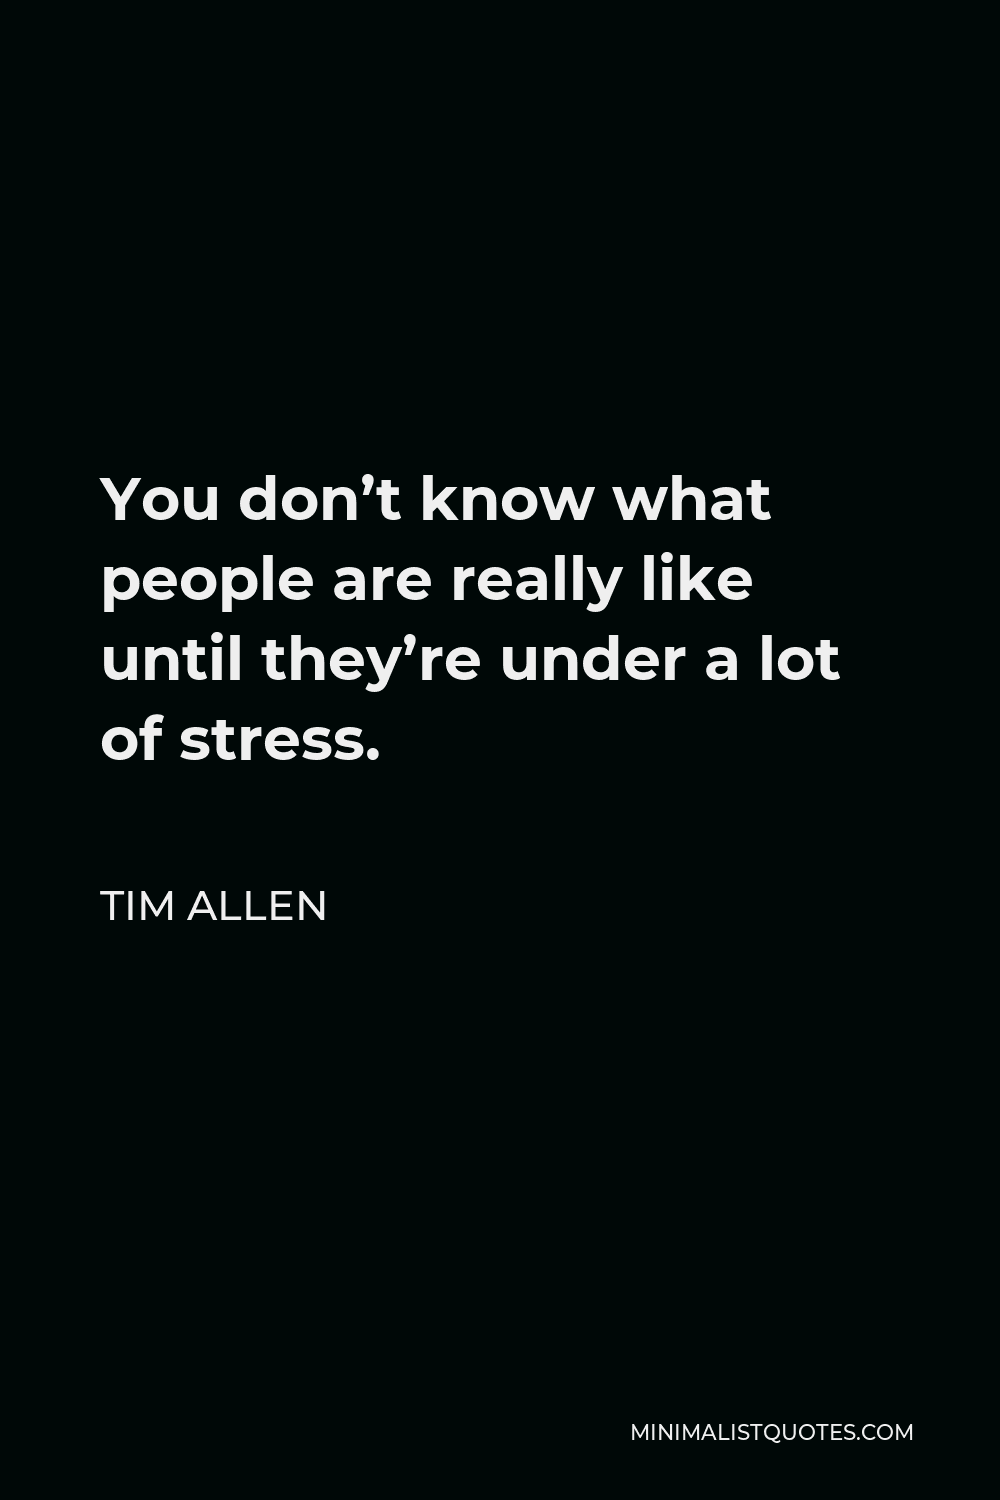 Tim Allen Quote - You don’t know what people are really like until they’re under a lot of stress.